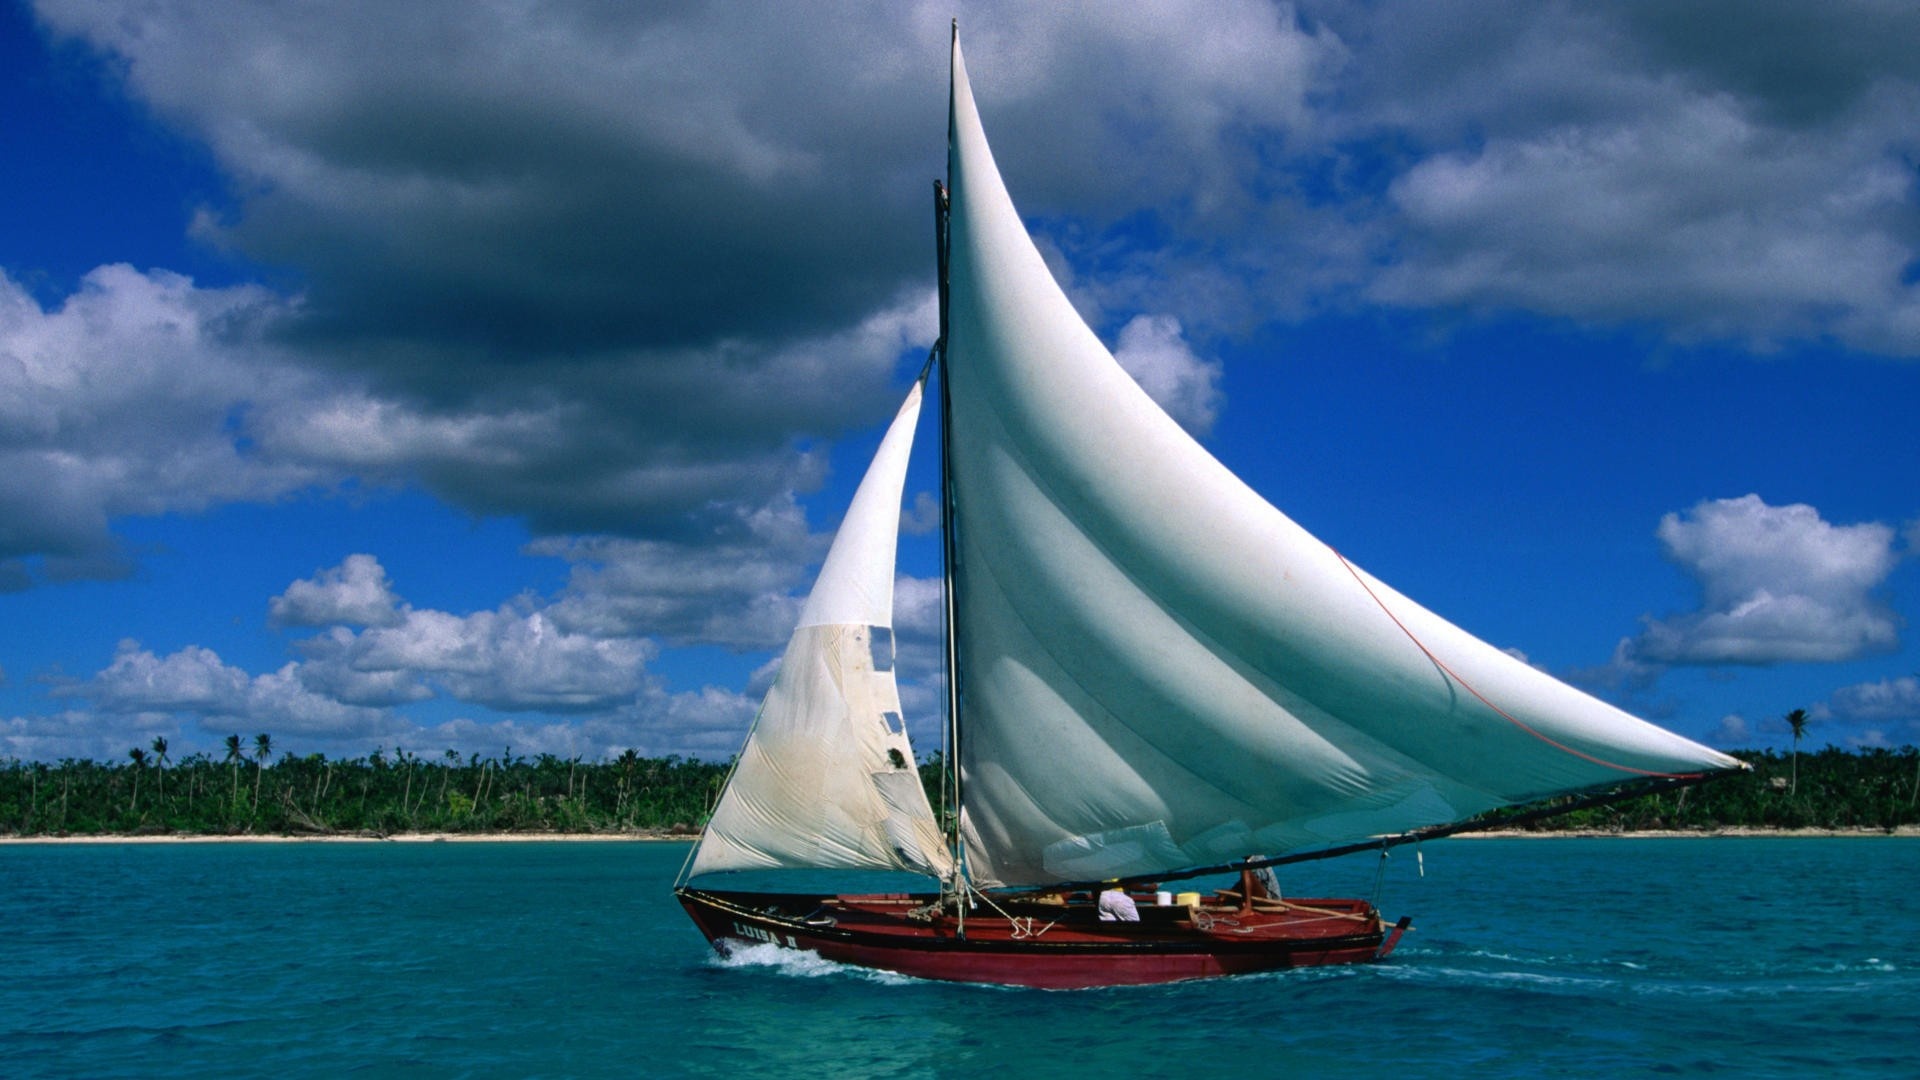 Sail Boat: Yacht, A craft used for fishing and sport. 1920x1080 Full HD Wallpaper.